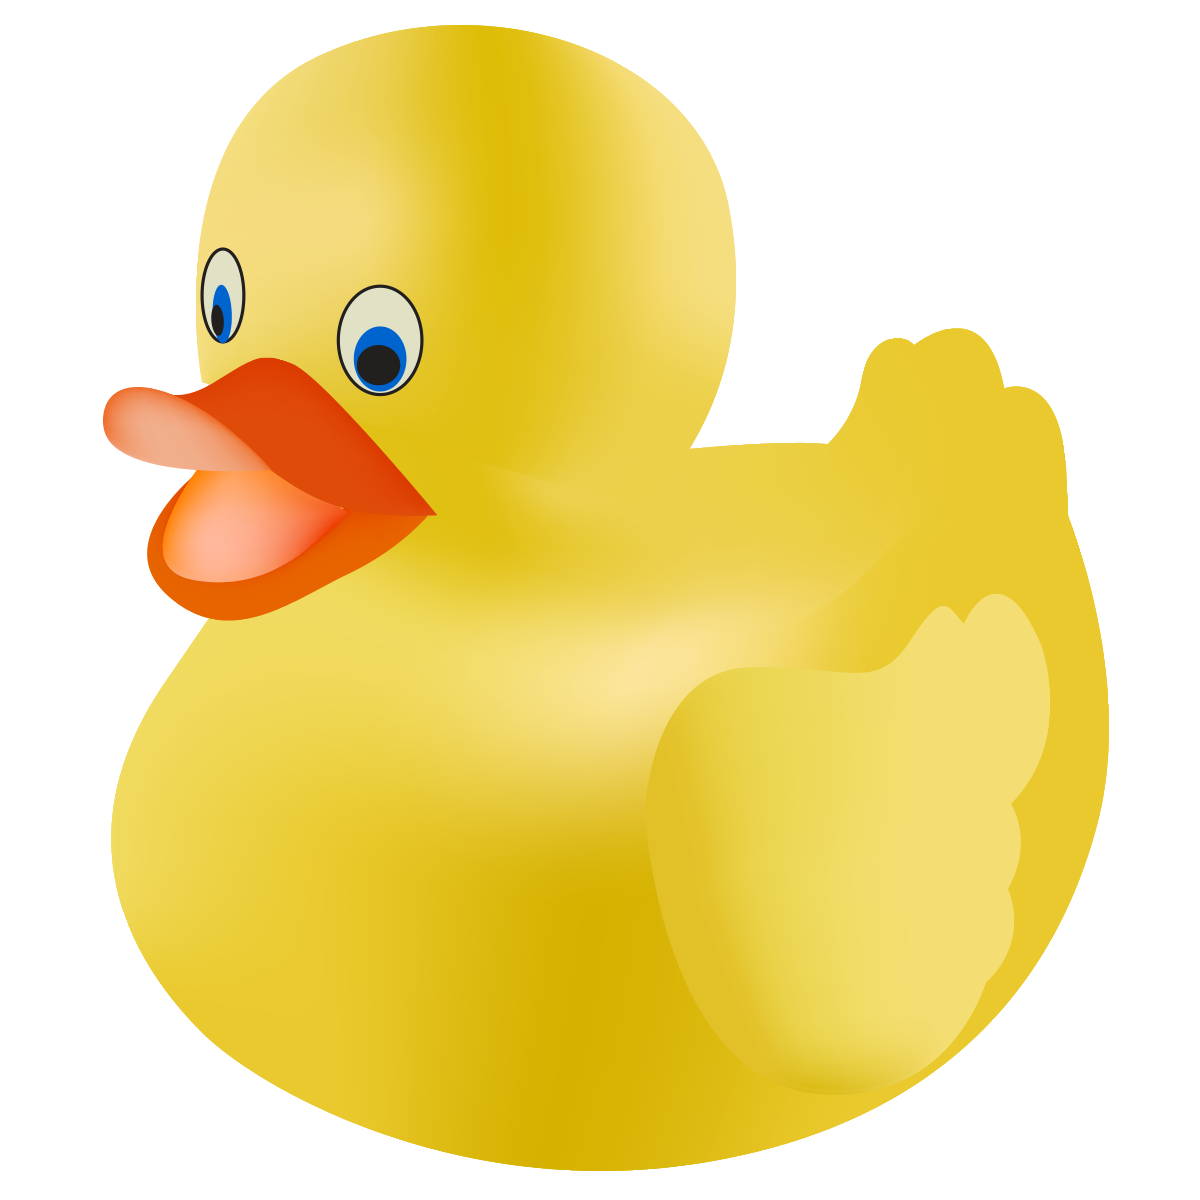 Rubber Ducks Cartoons Free Cliparts That You Can Download To You